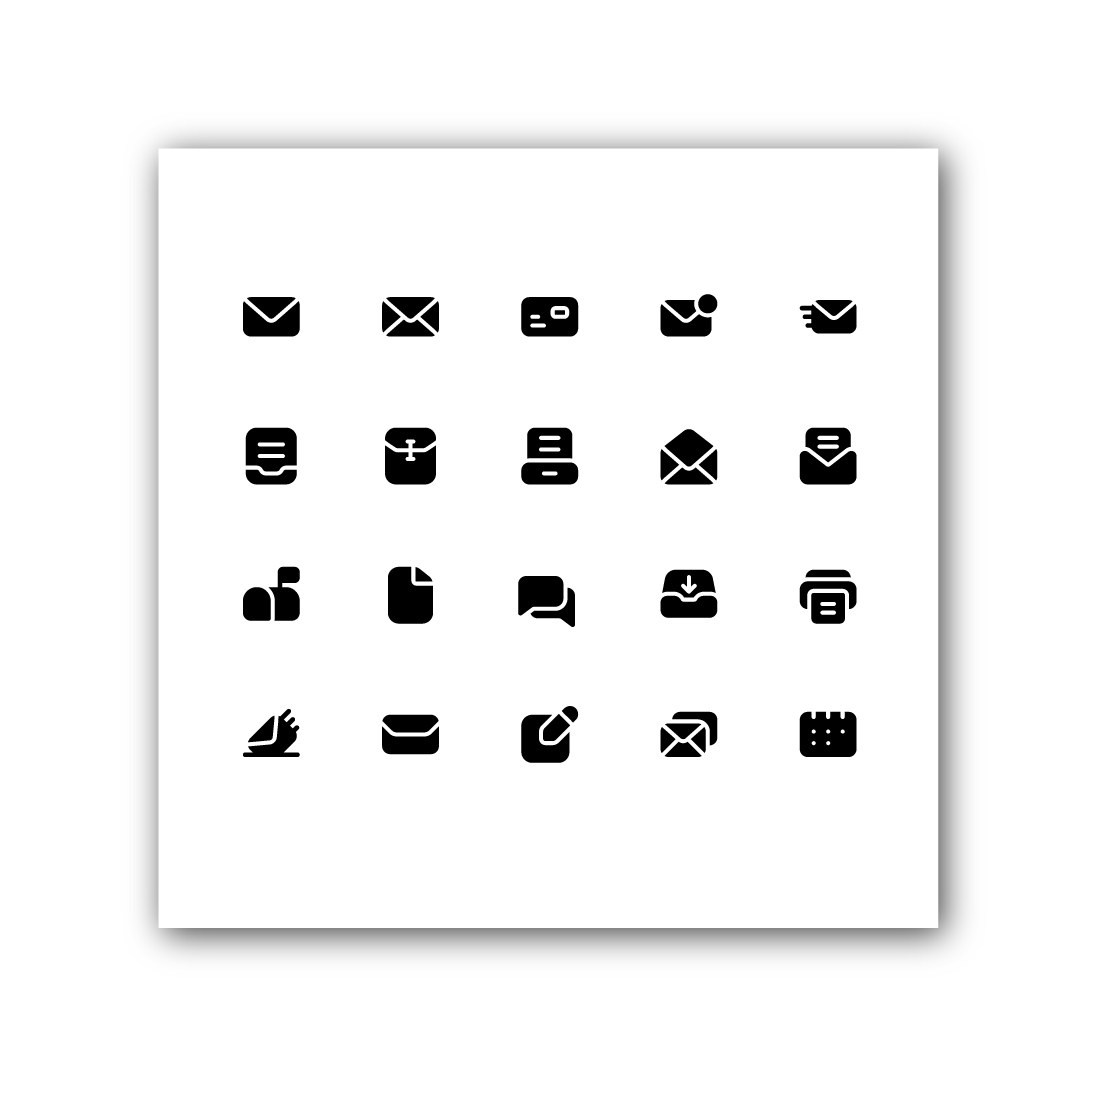 20 Advance Email Icon Design cover image.